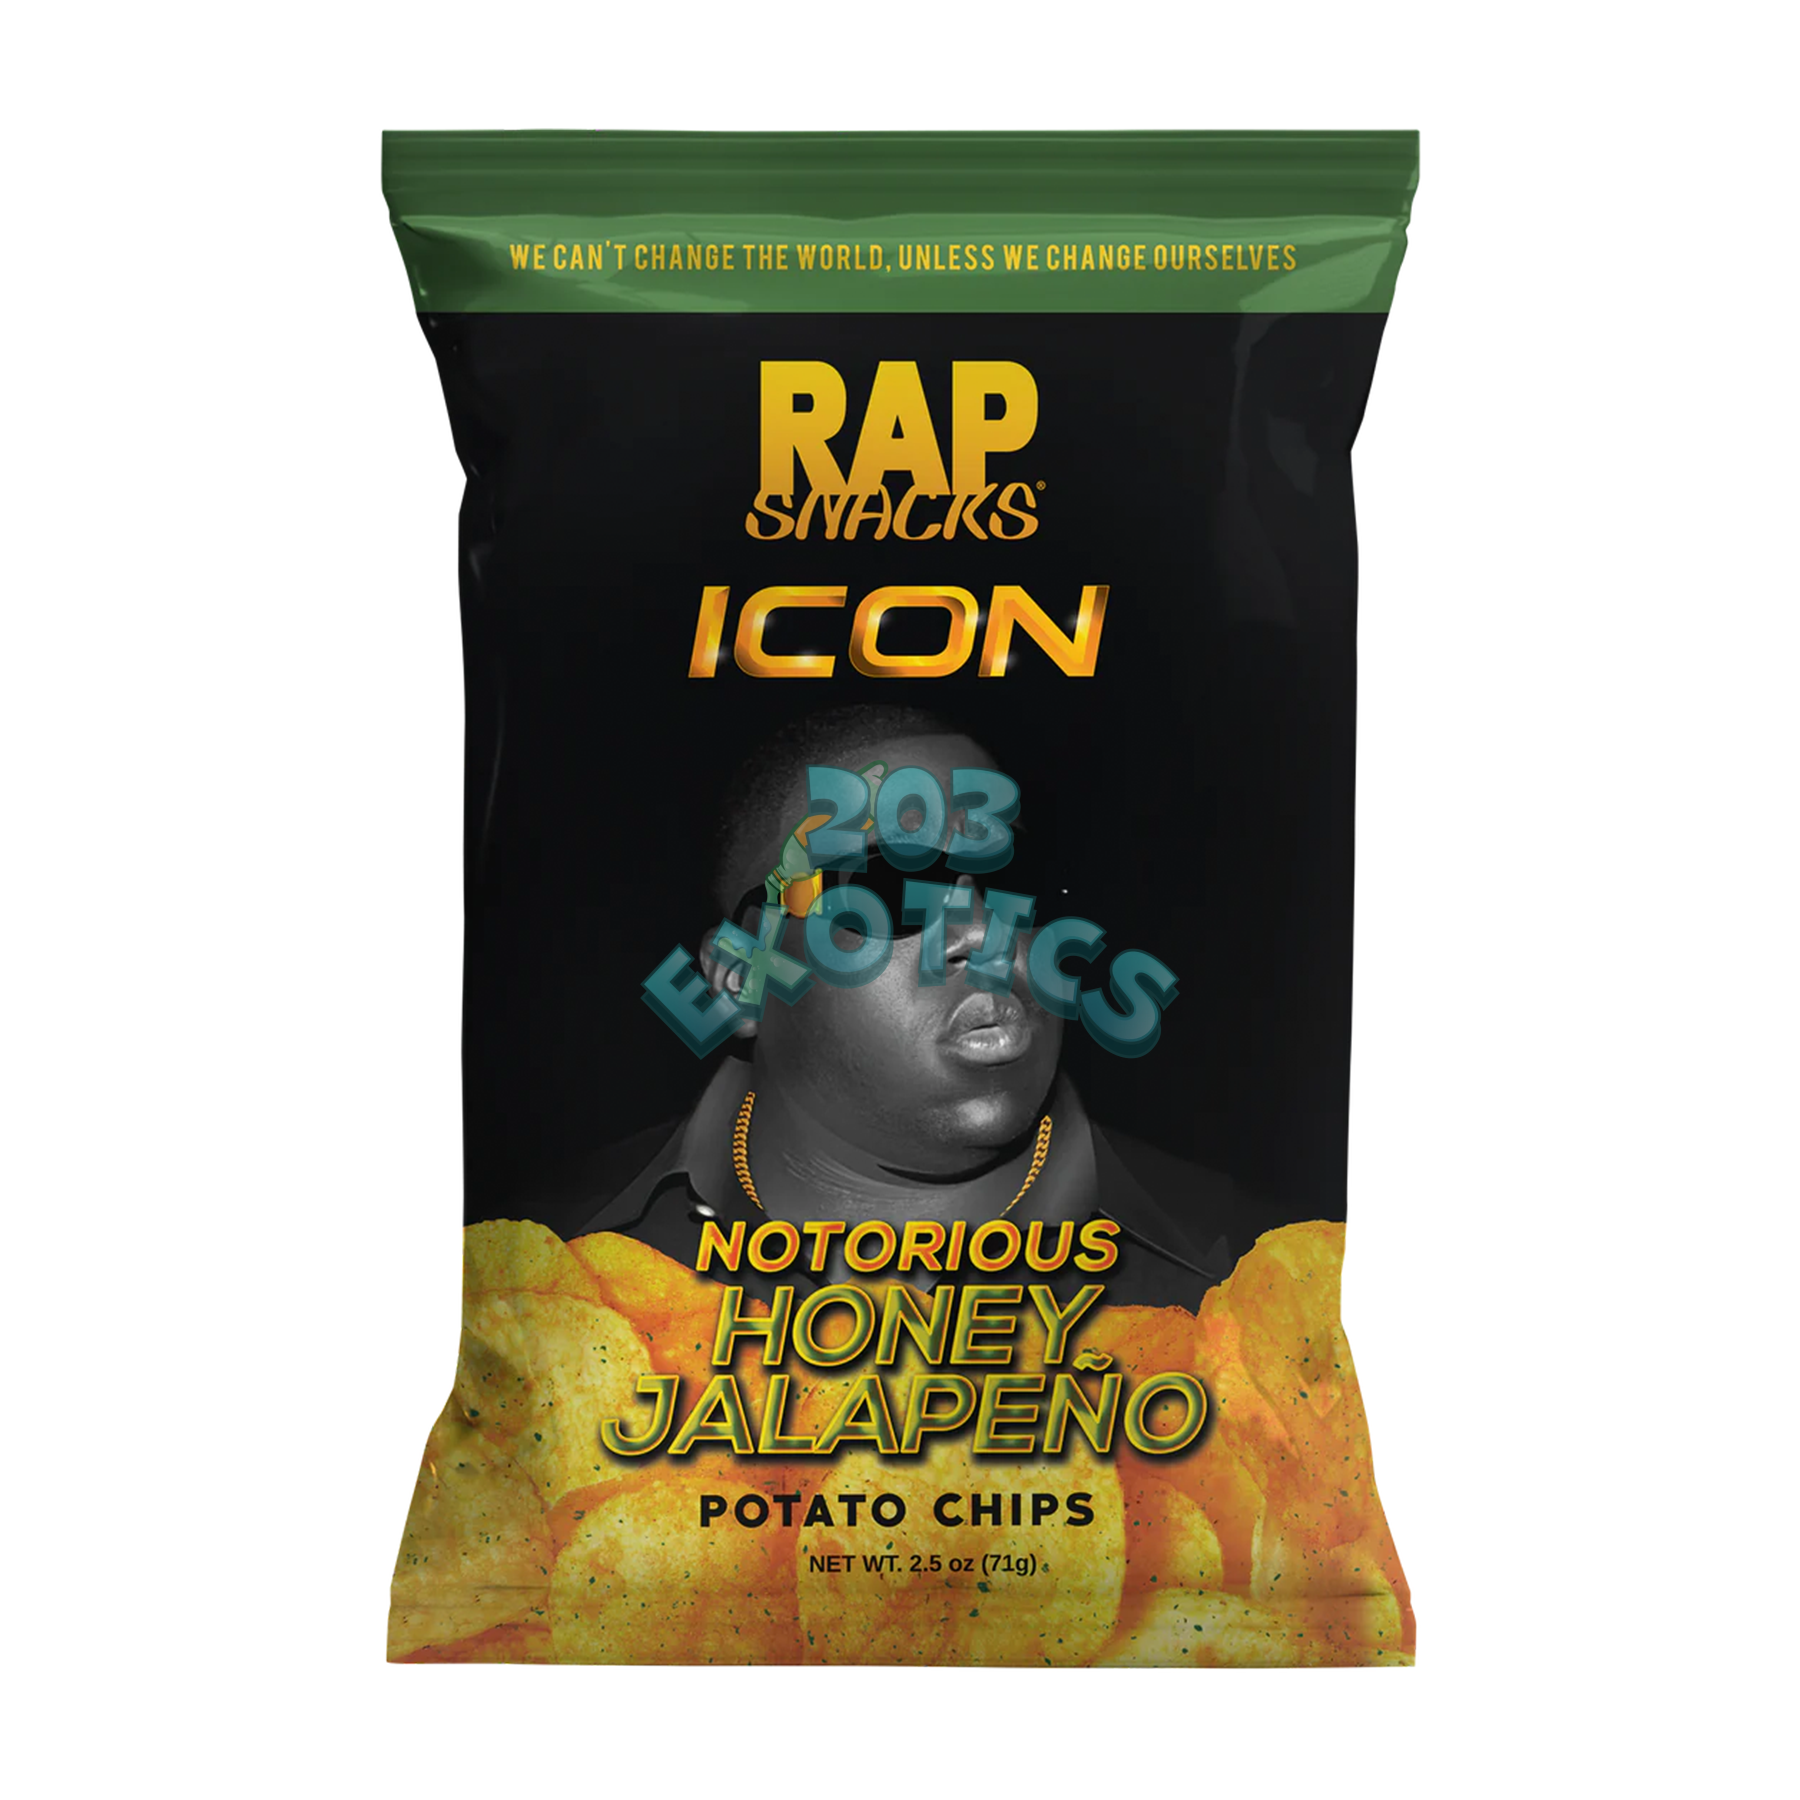 Rap Snacks The Notorious B.i.g. Icon Honey Jalapeño Flavored Chips